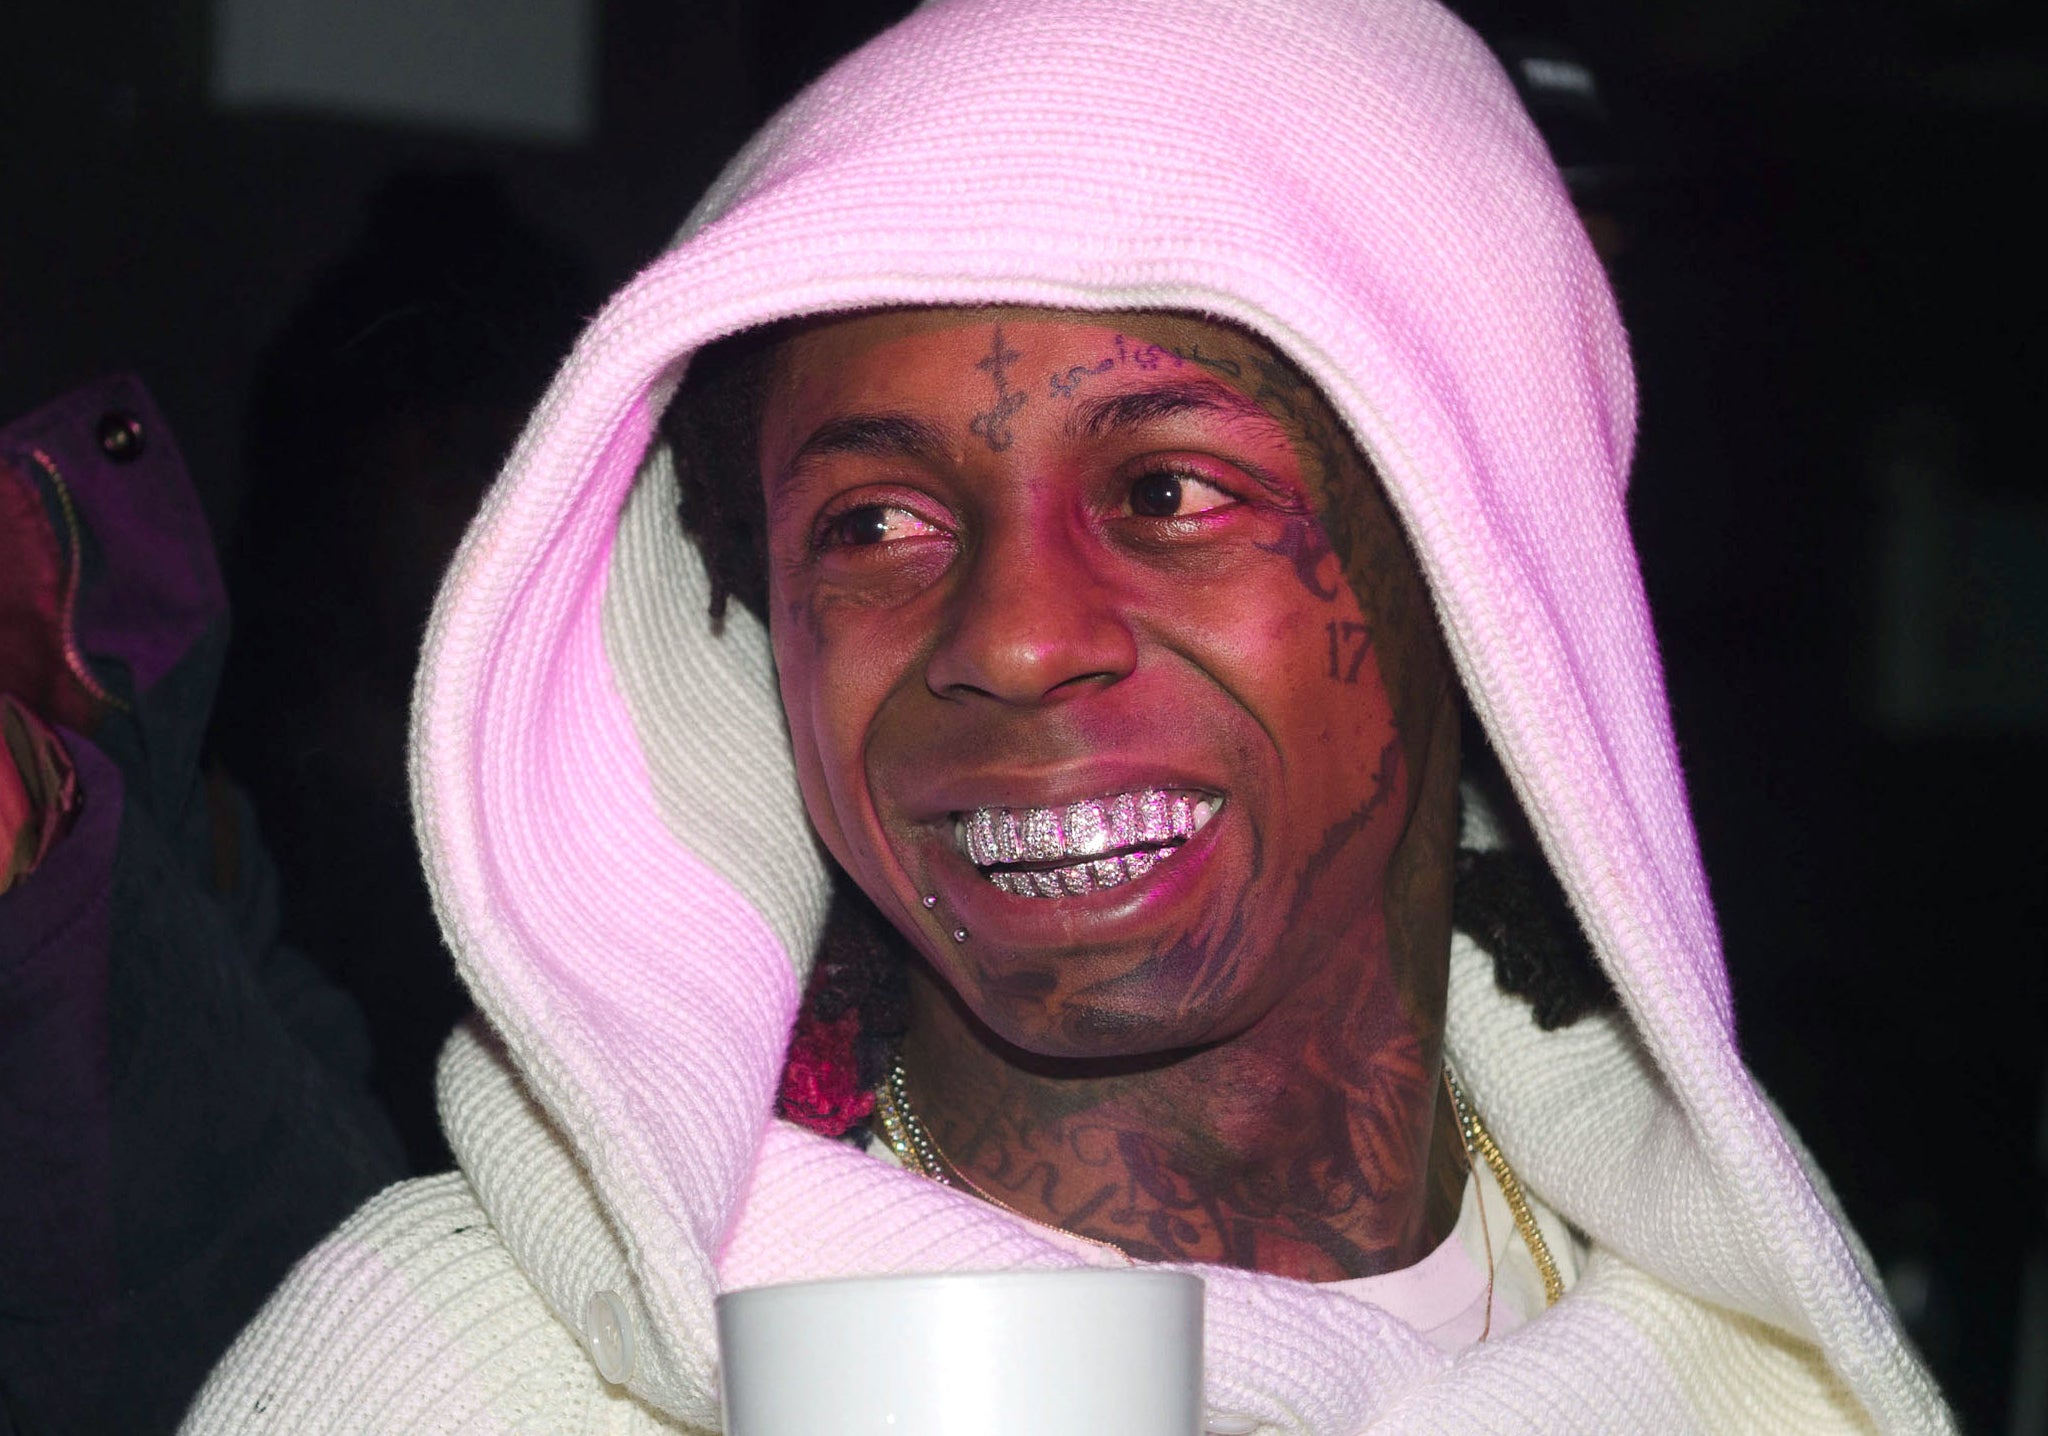 Lil Wayne attends Young Money All-Star Game After Party at Stage 48 in February 2015.